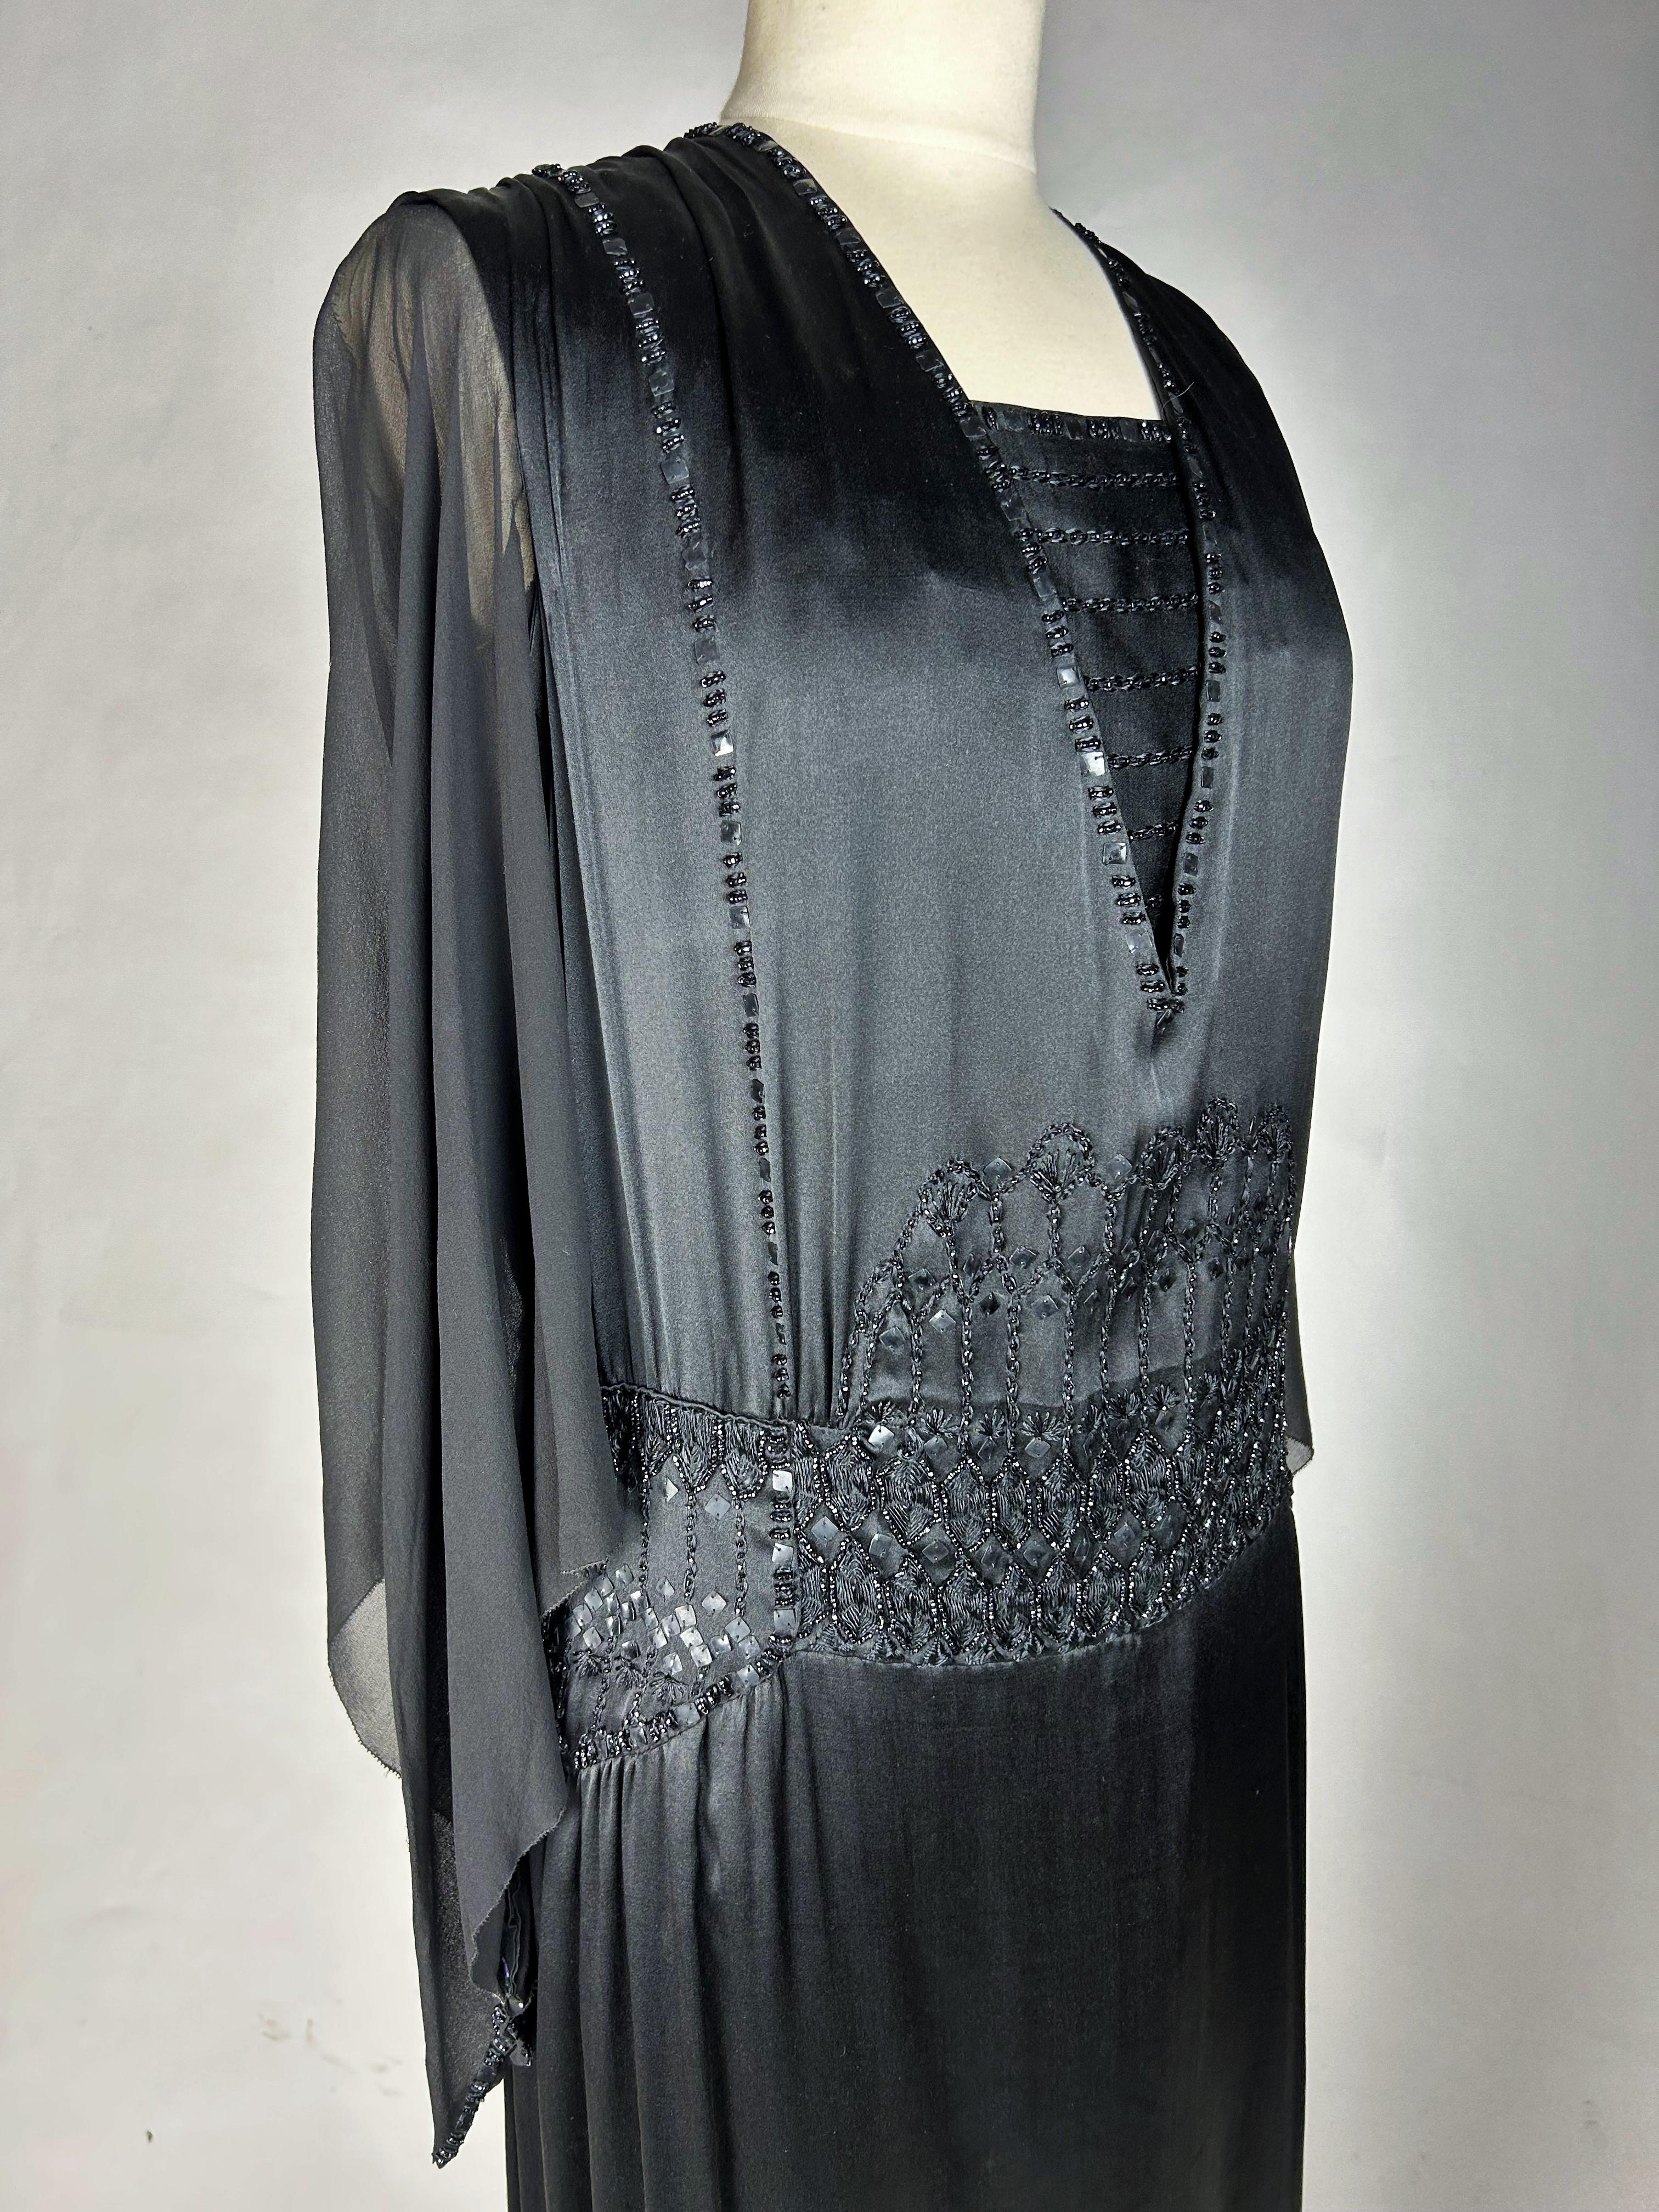 Long evening dress in embroidered satin and chiffon - Paris Circa 1920 For Sale 10